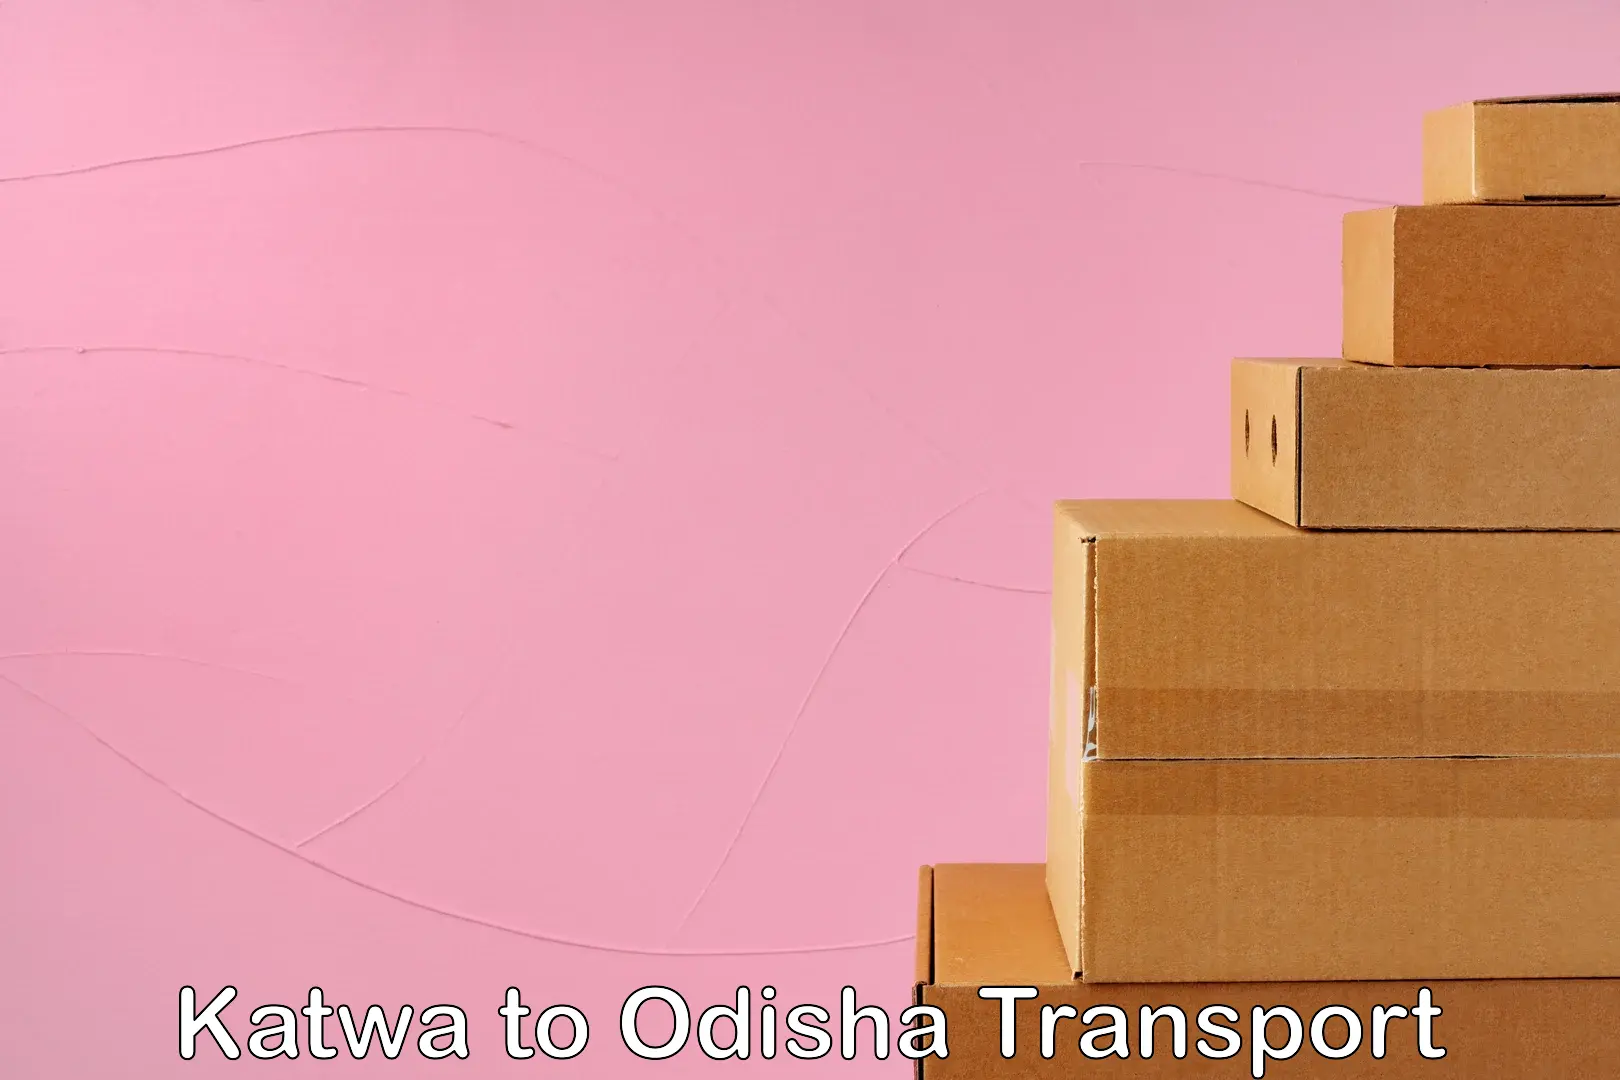 Part load transport service in India Katwa to Dhamanagar